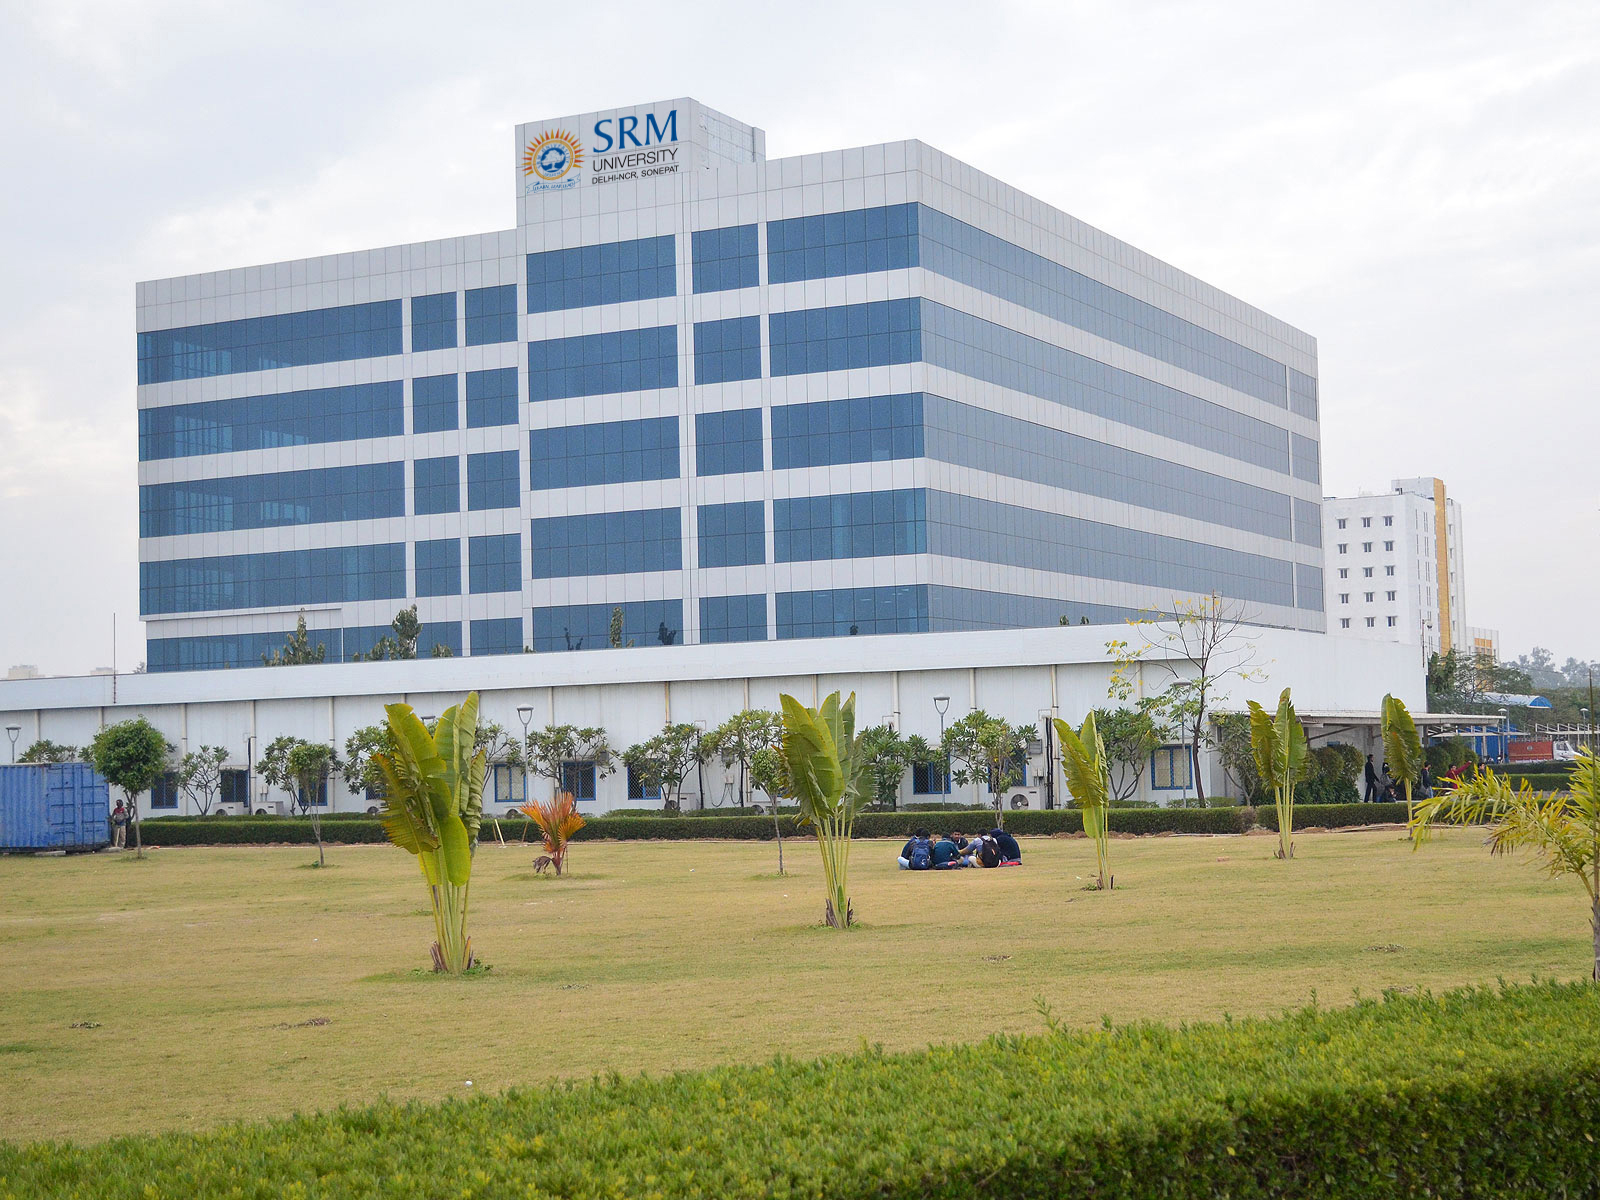 How does SRM University foster a culture of innovation and entrepreneurship